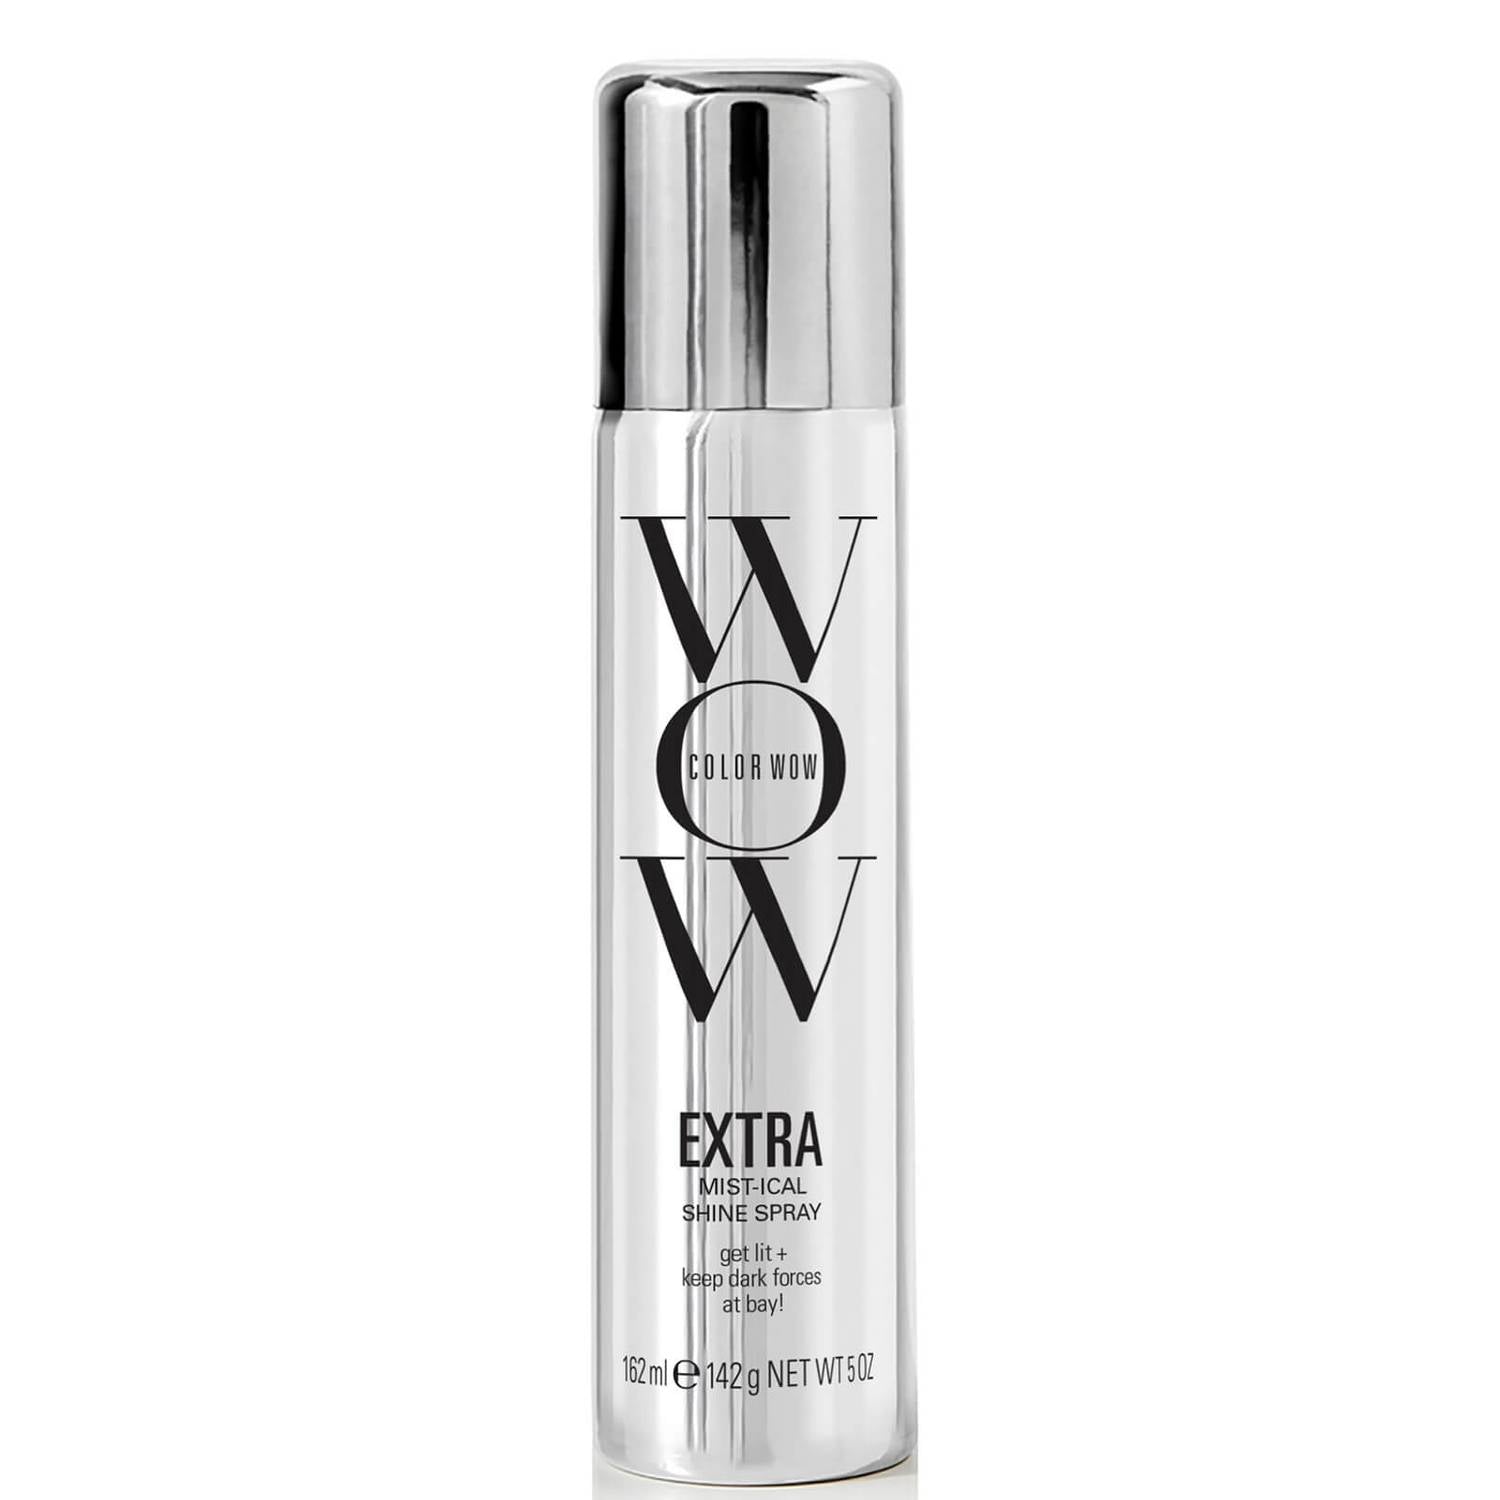 Color Wow Color Wow | Extra Mist-ical Shine Spray 162ml - SkinShop